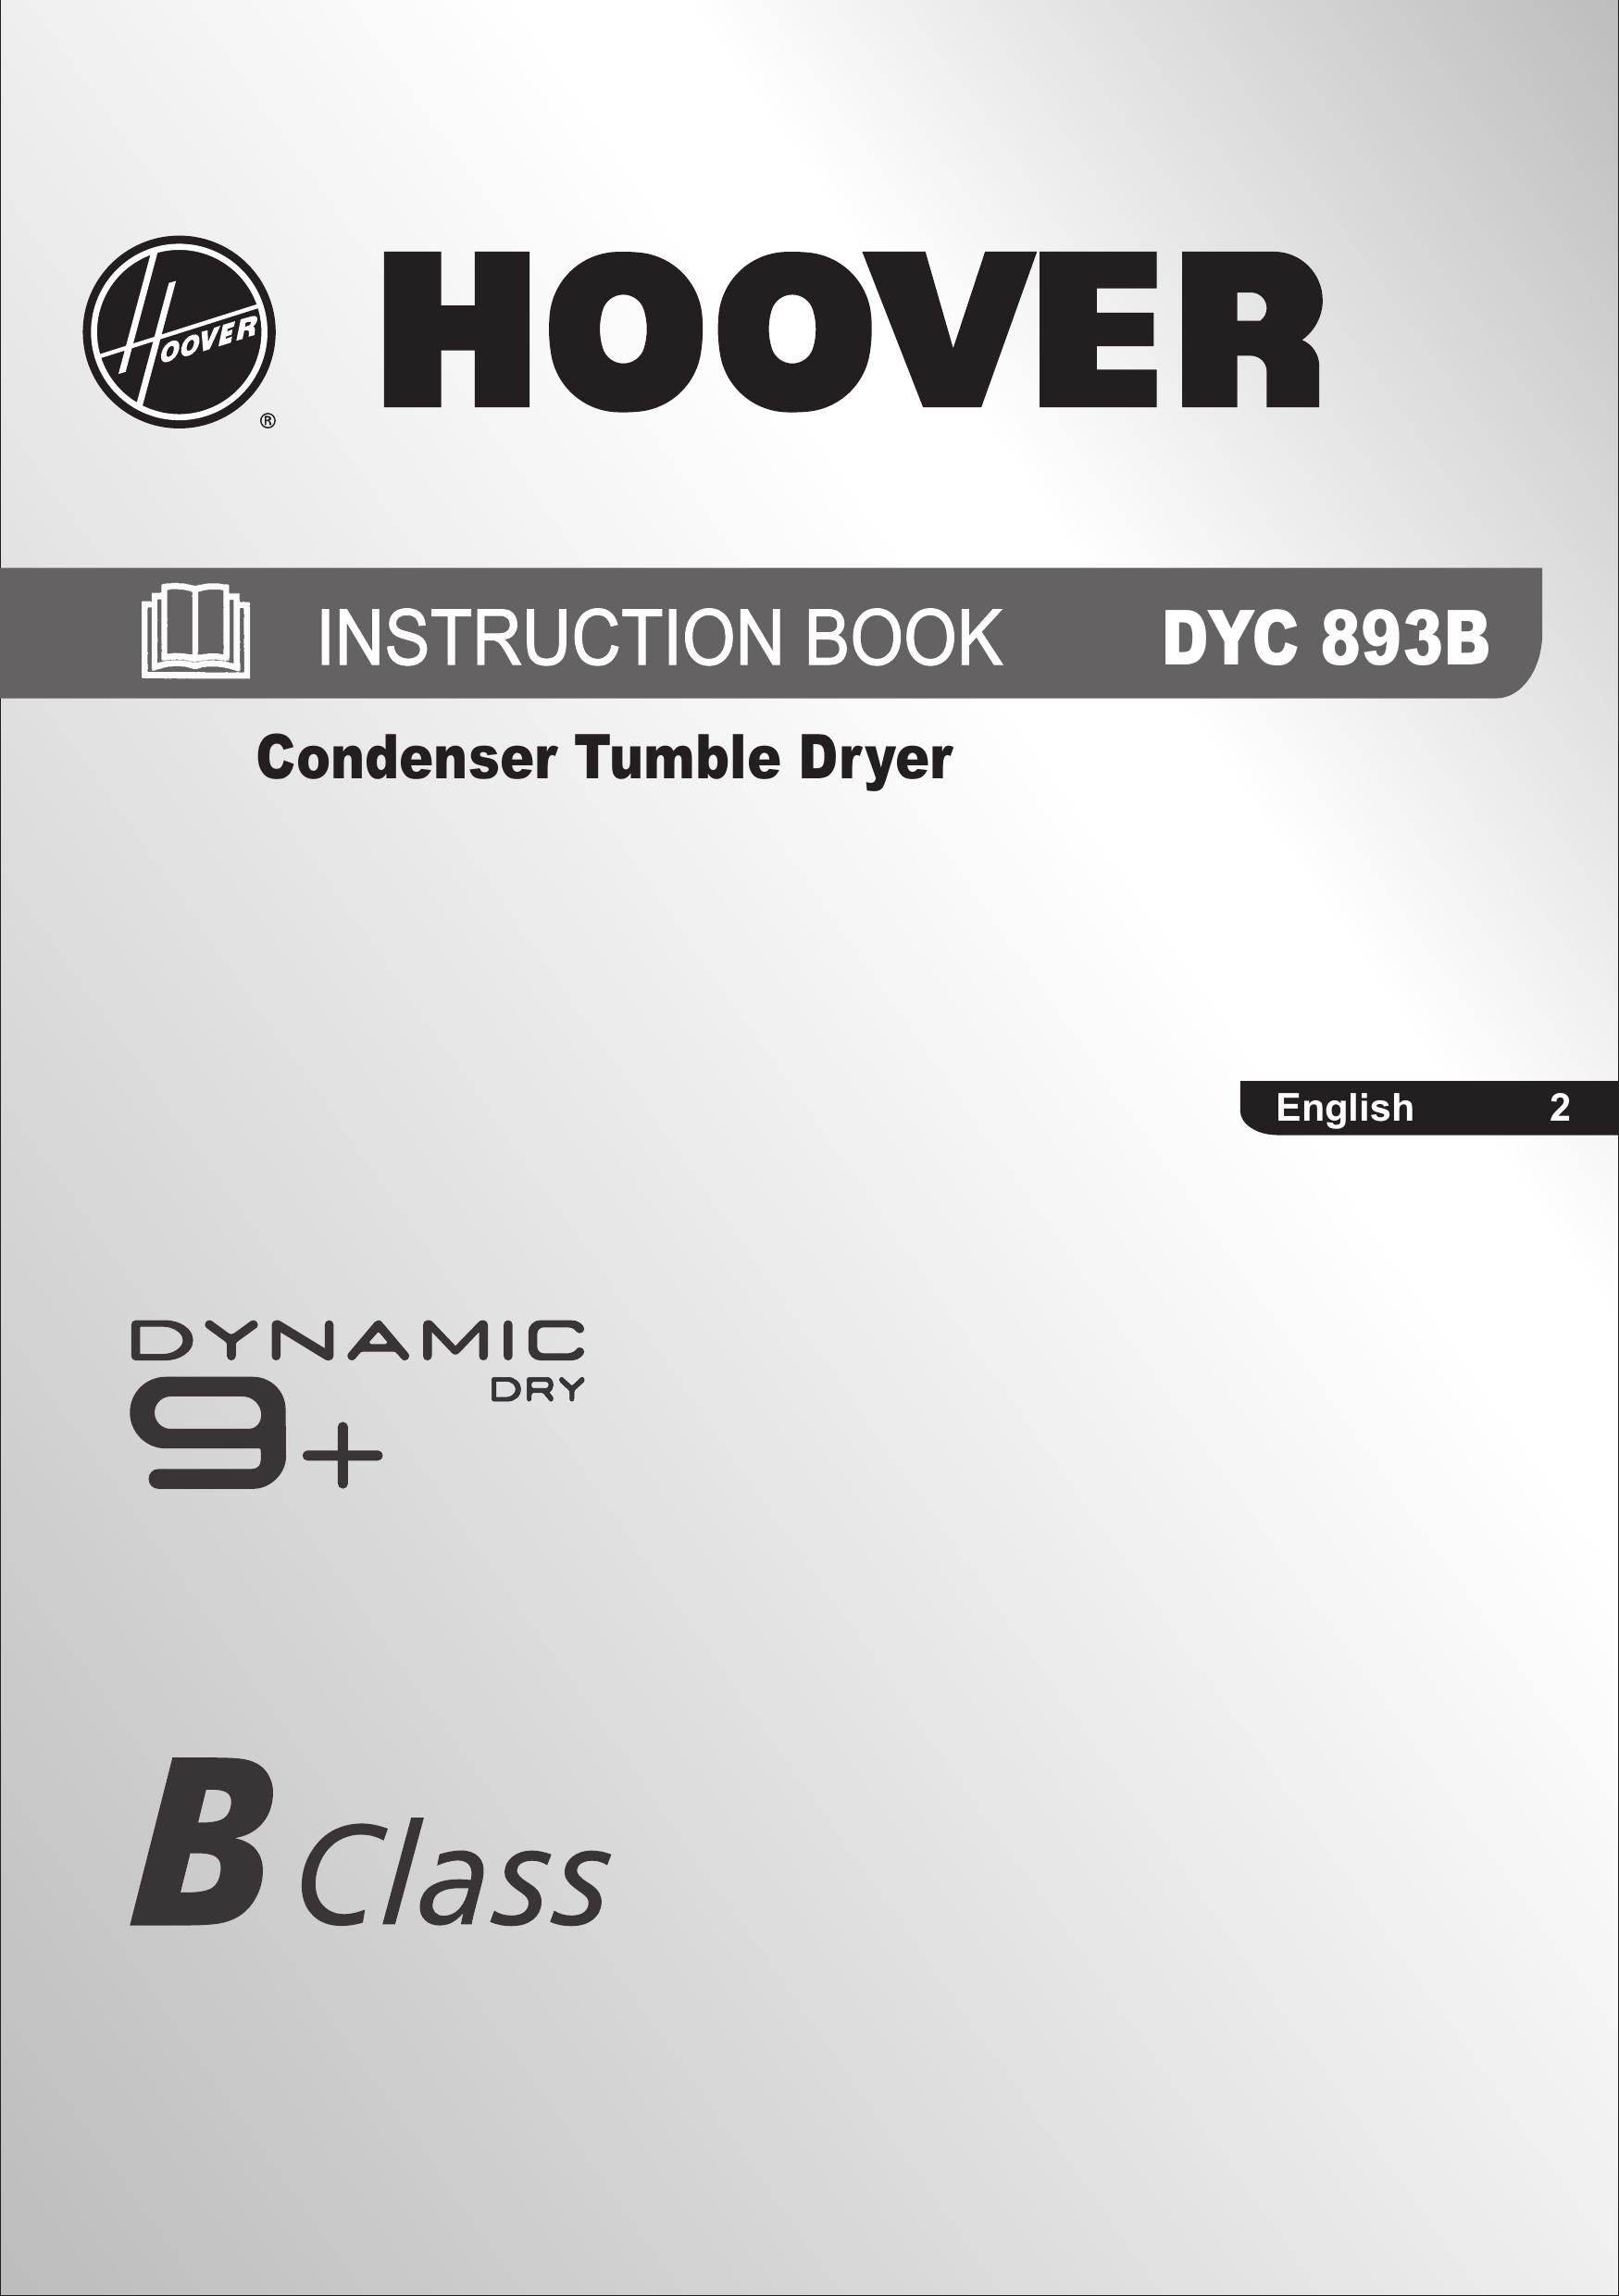 Hoover DYC 893B Clothes Dryer User Manual